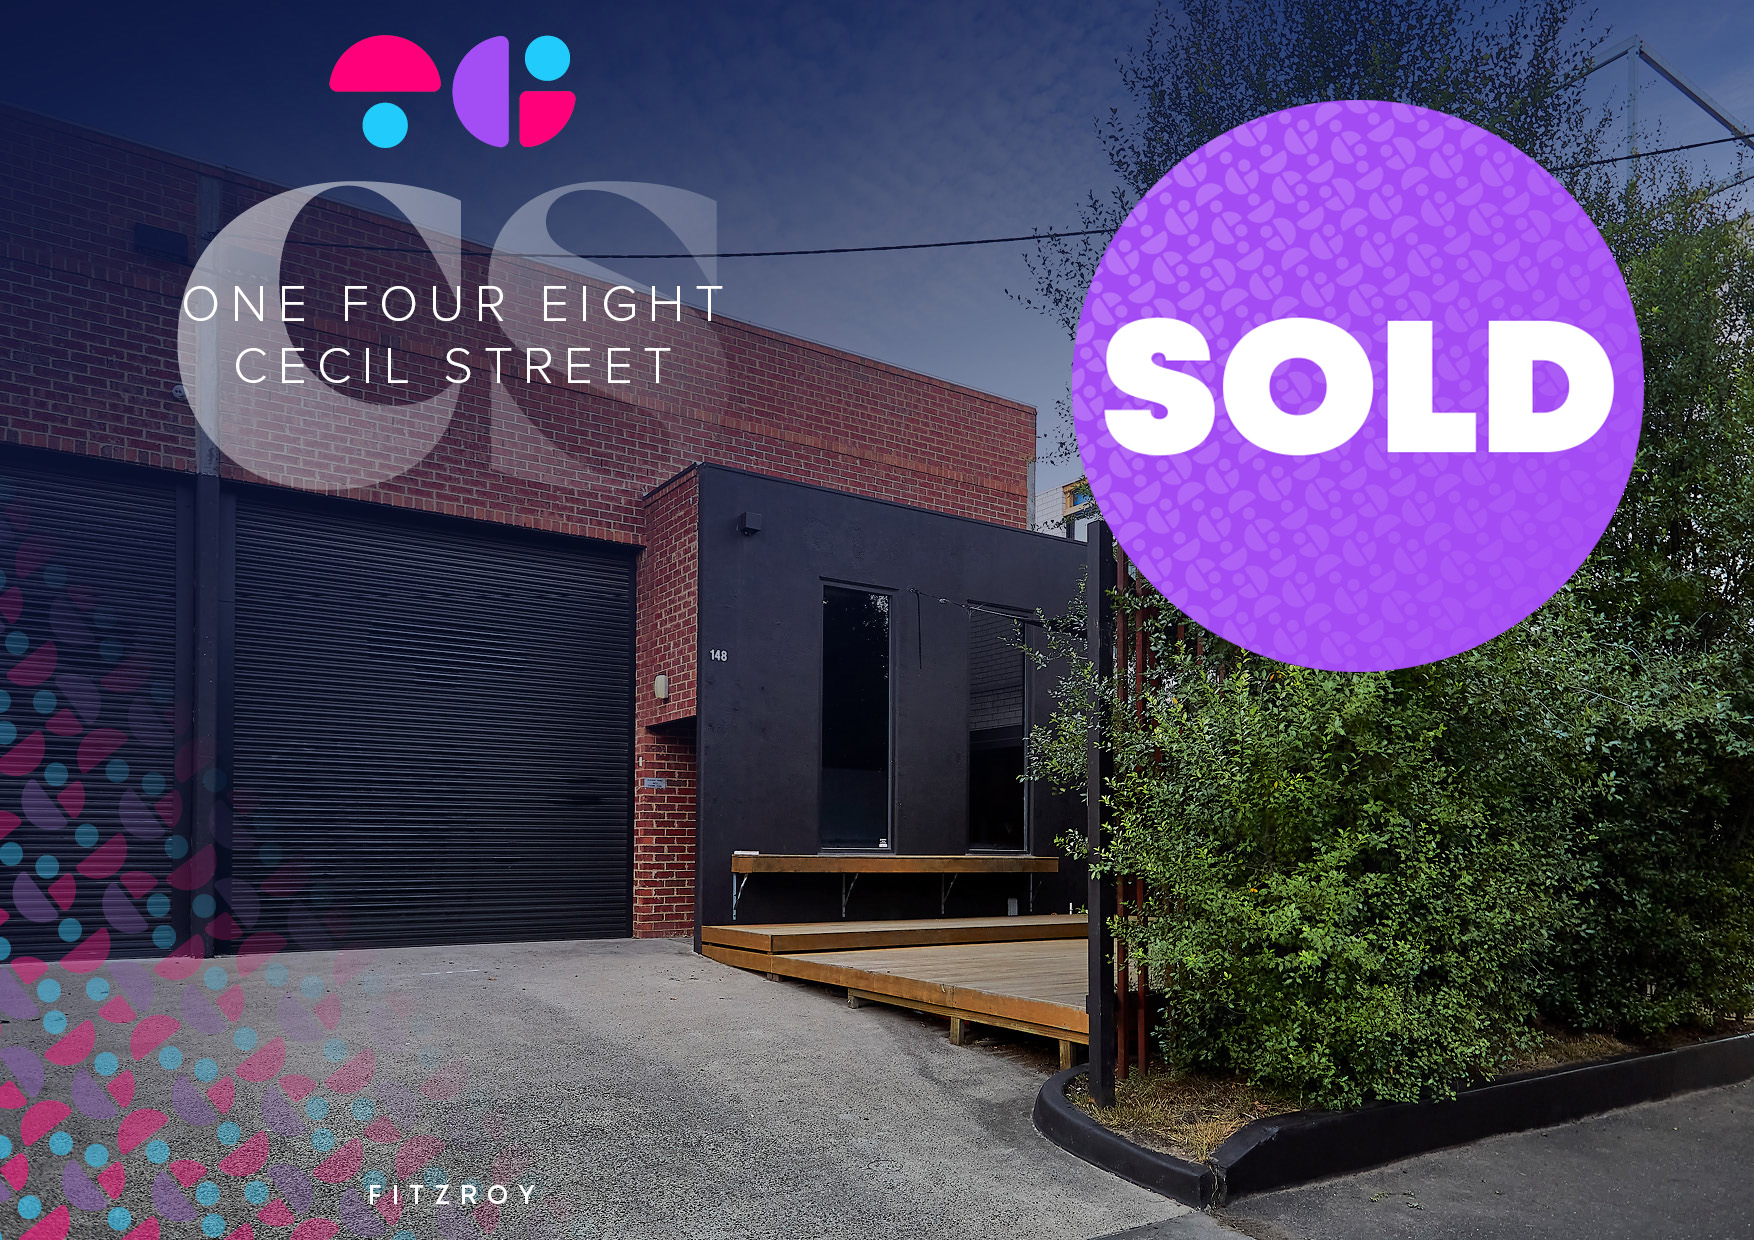 Sale 148 Cecil Street Fitzroy Warehouse Commercial Real Estate TCI The Cecil Collective Part 2 Sold